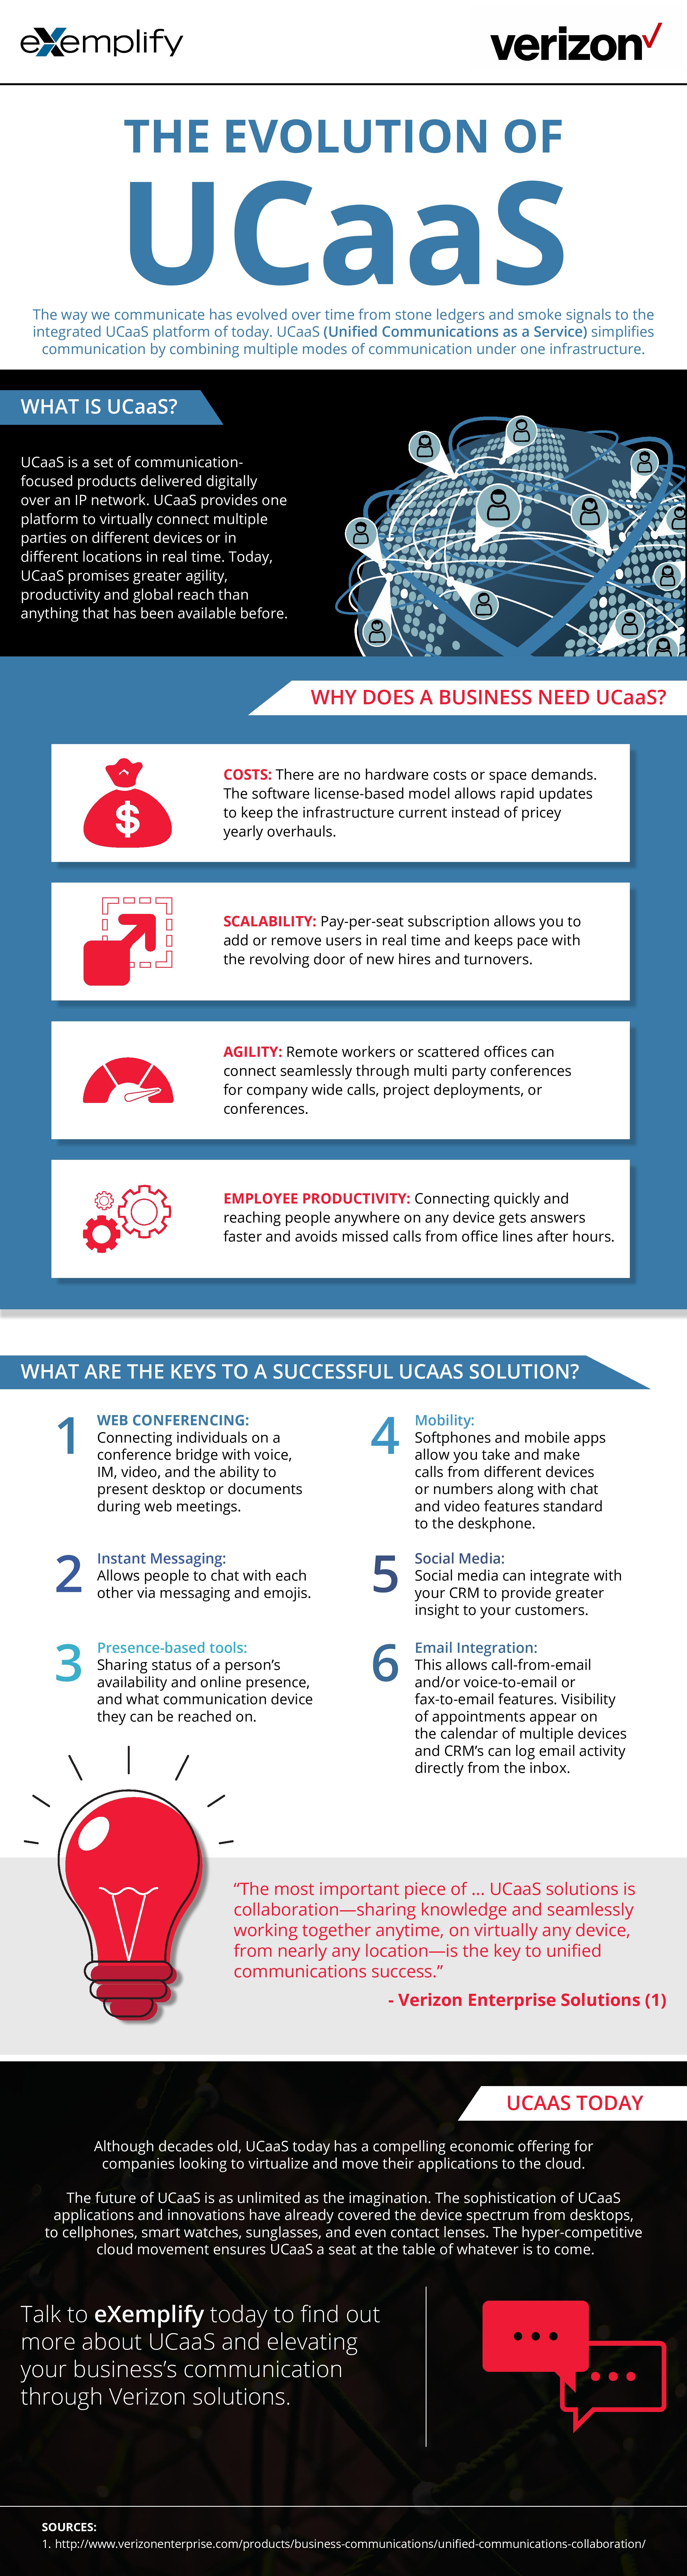 Learn how UCaaS has evolved over the years.